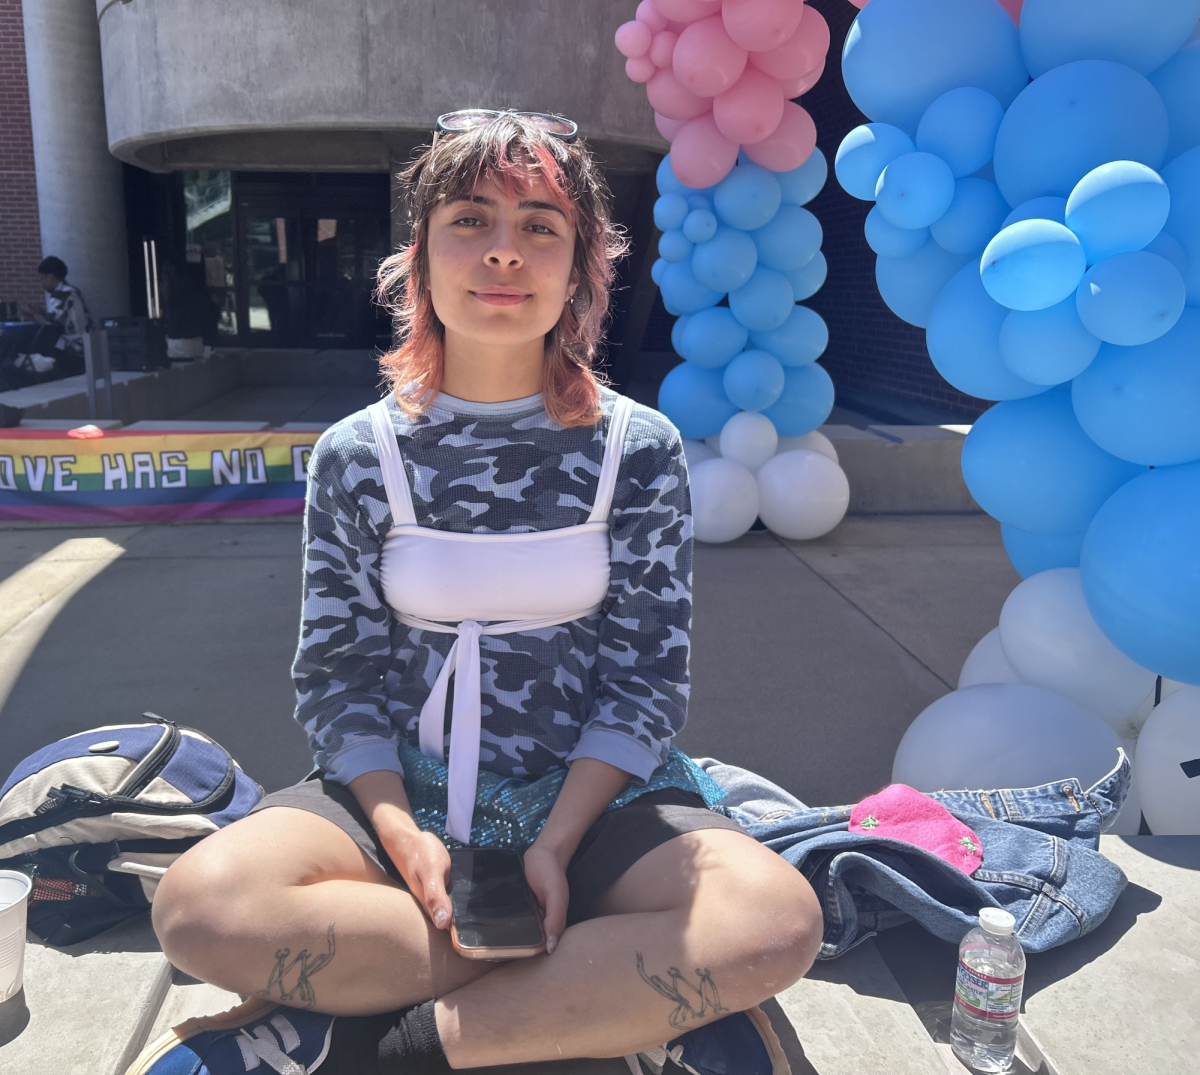 “(Drag) encourages trans identities to explore their identity more in an artistic and creative way that allows for expression.” - Valentine Gonzalez, City College student